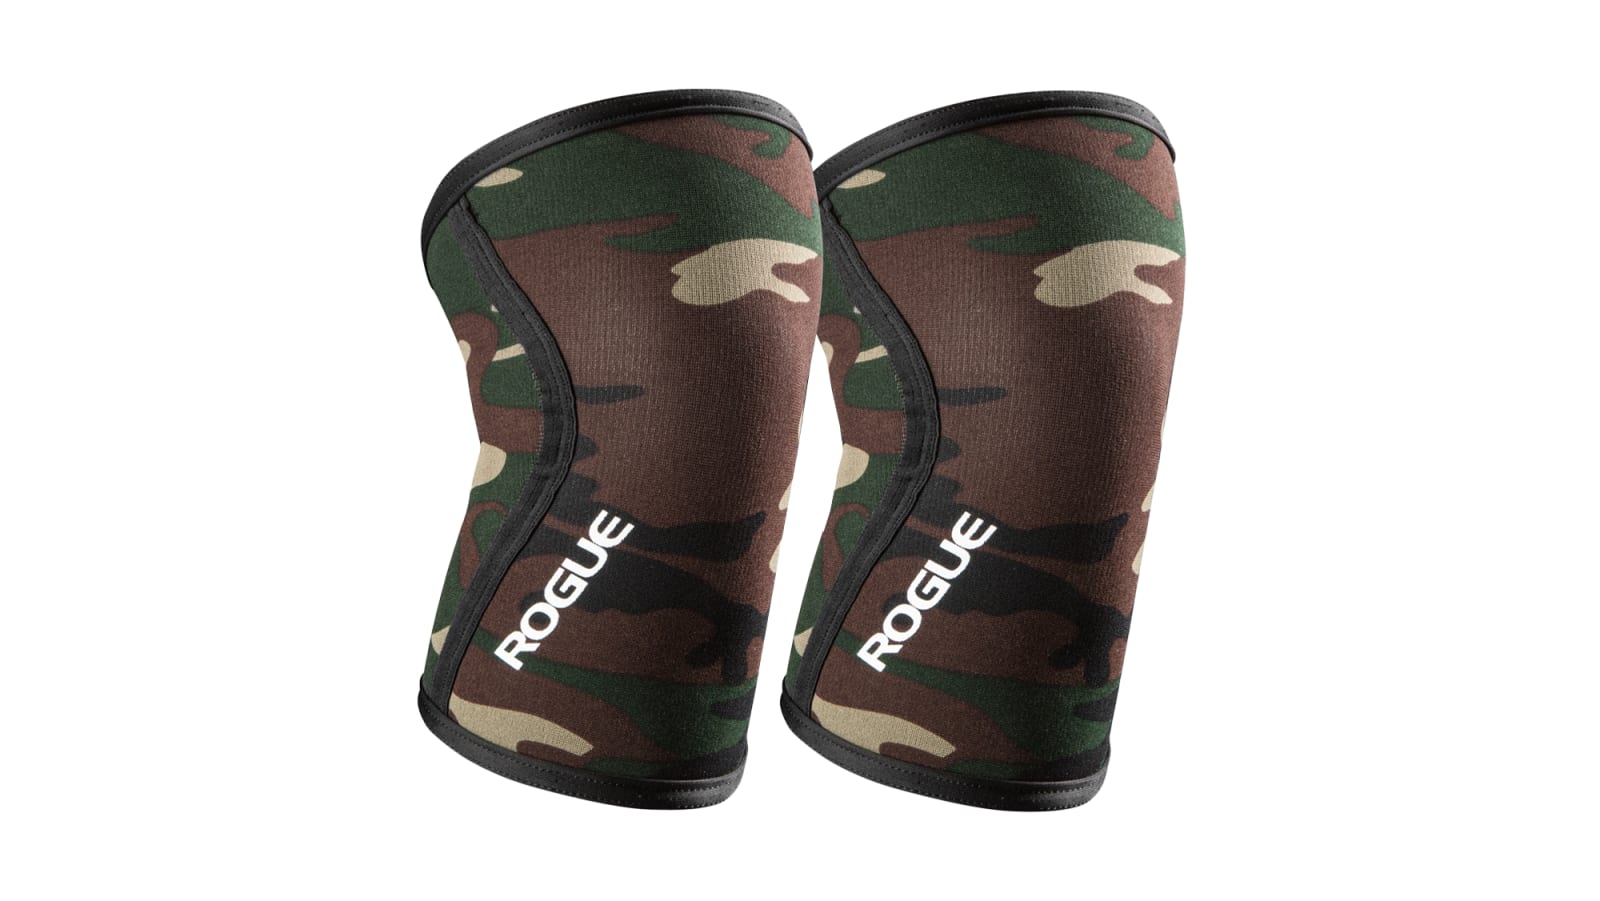 Gray Camo Sedroc Weight Lifting Knee Compression Sleeves Crossfit Gym Training 